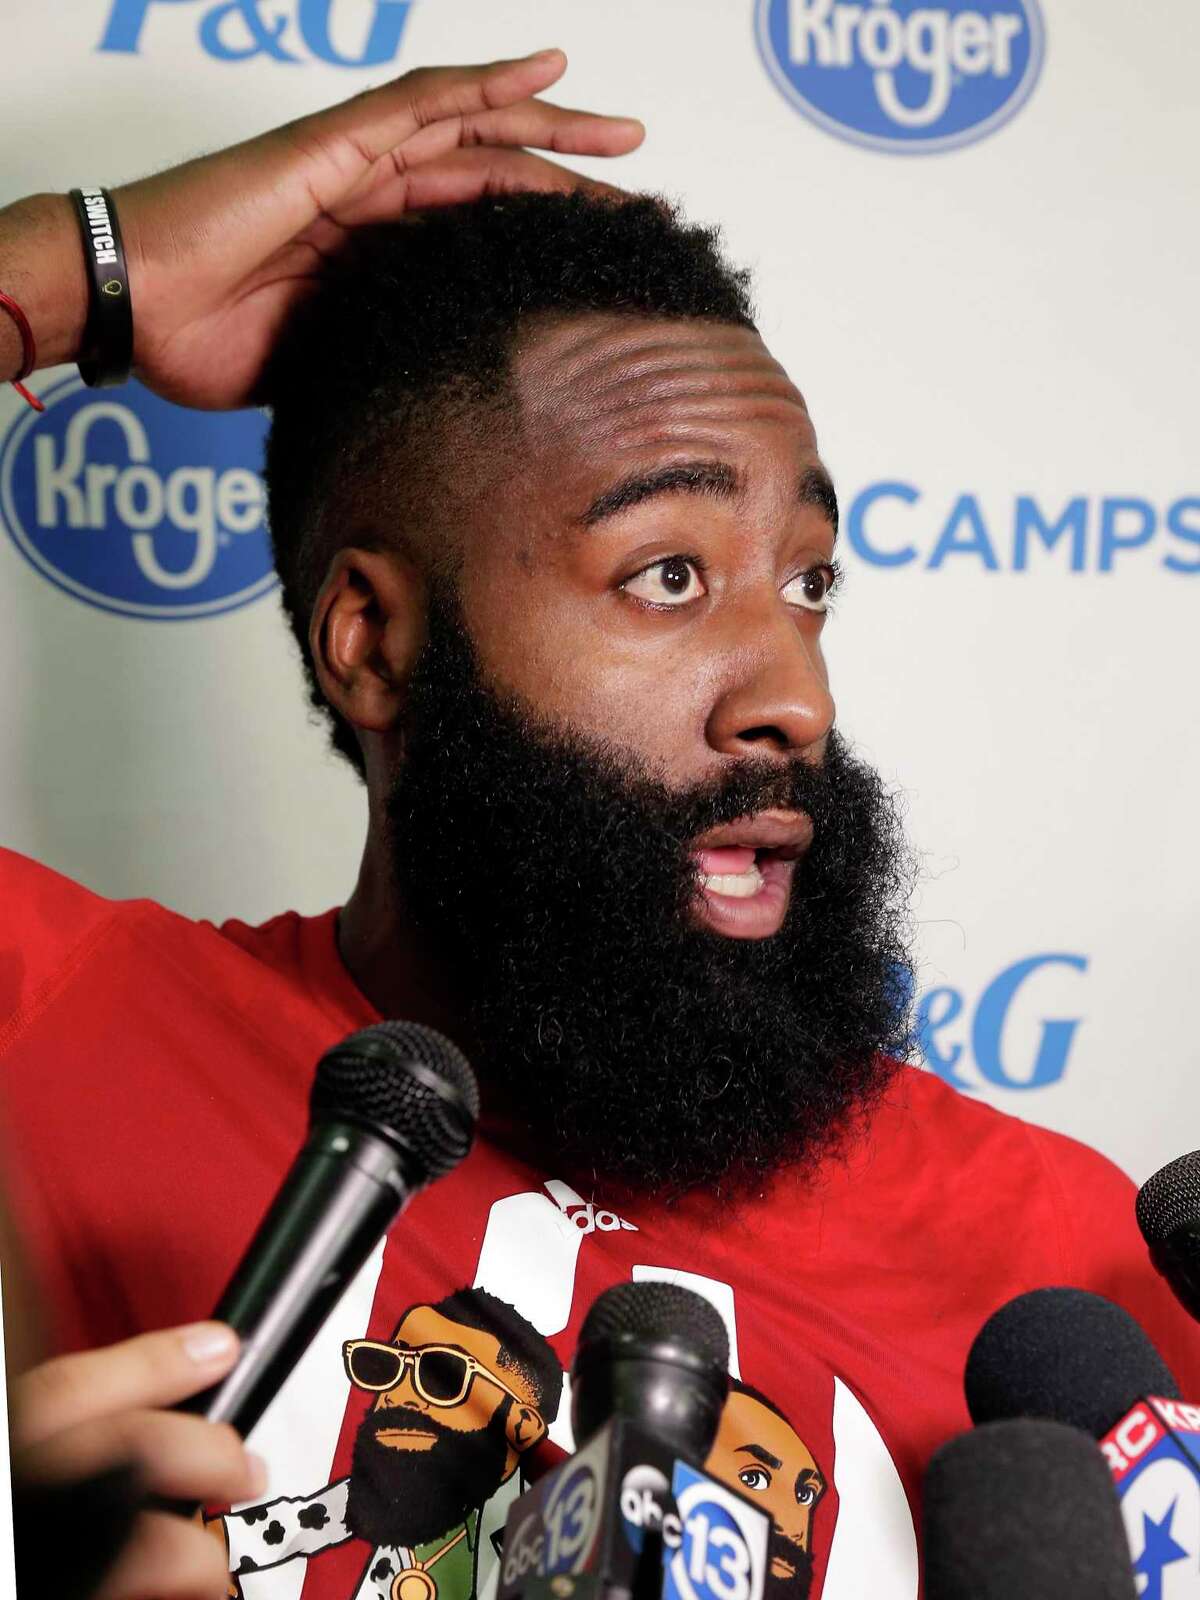 For all the questions, still more cheers for James Harden